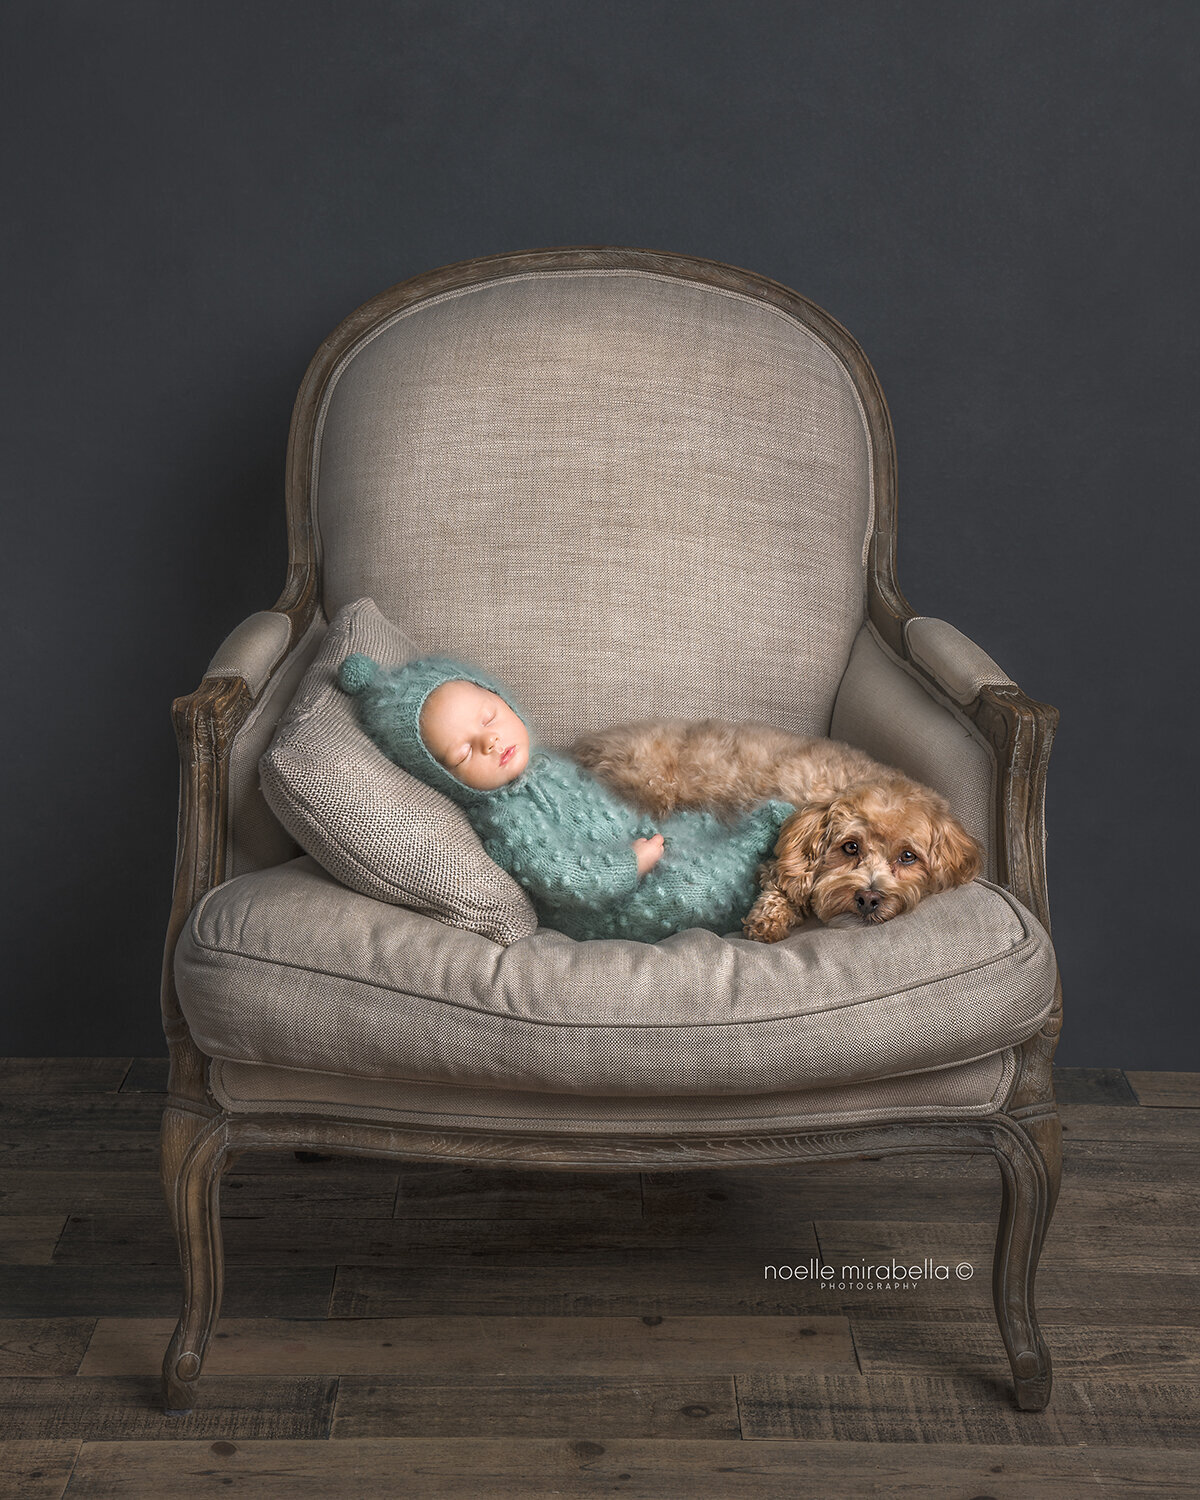 Newborn baby sleeping with dog in a vintage style chair.